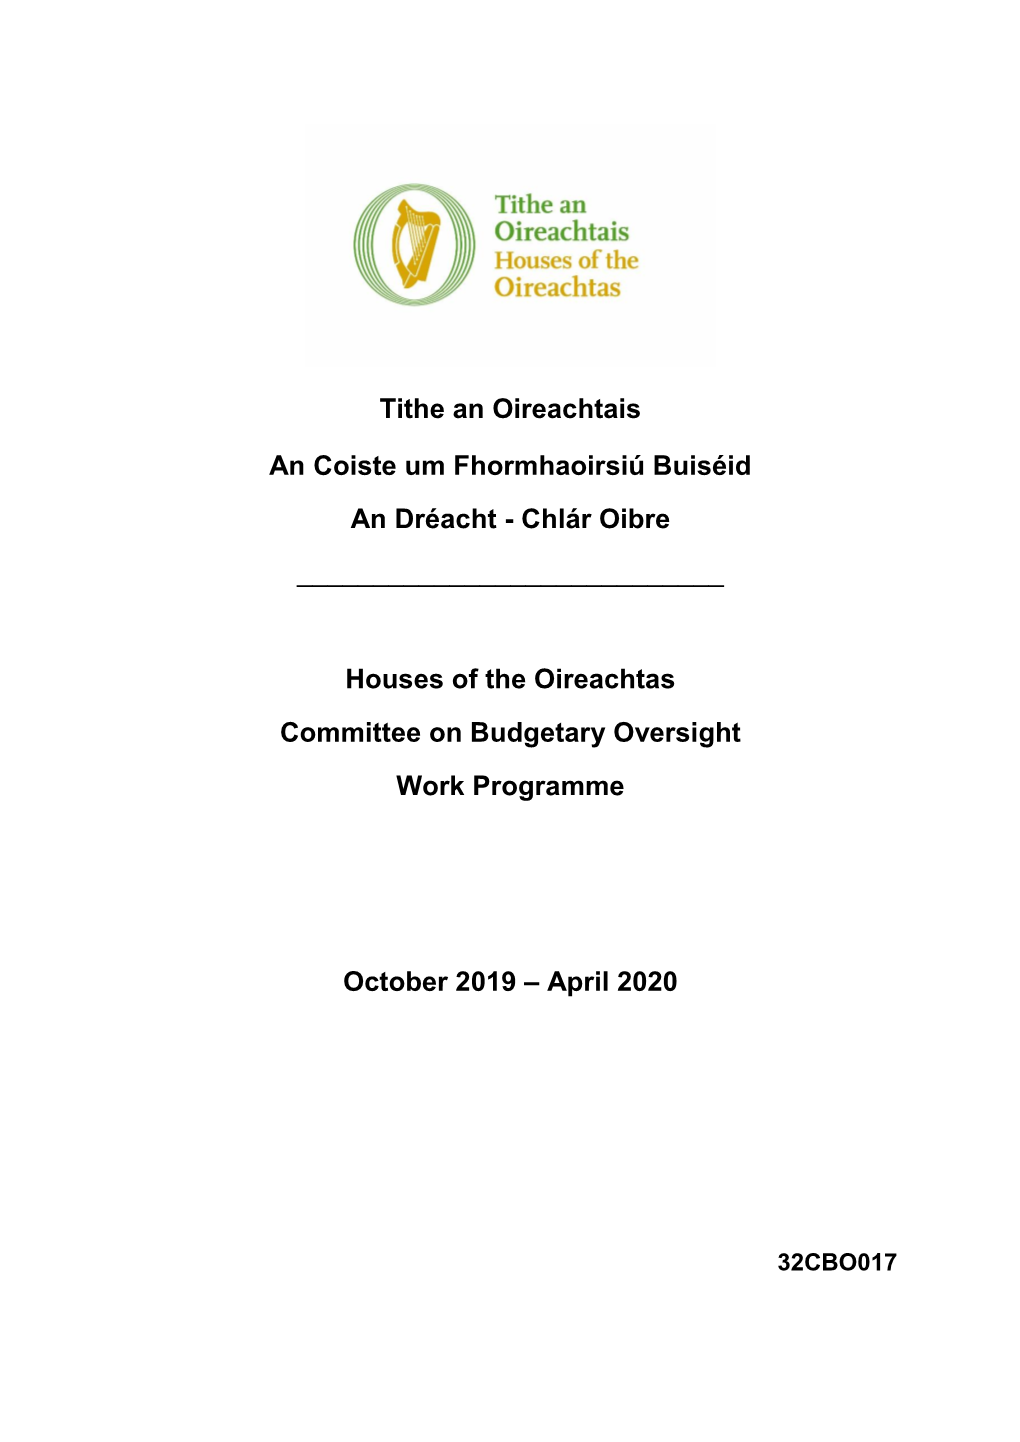 Houses of the Oireachtas Committee on Budgetary Oversight Work Programme